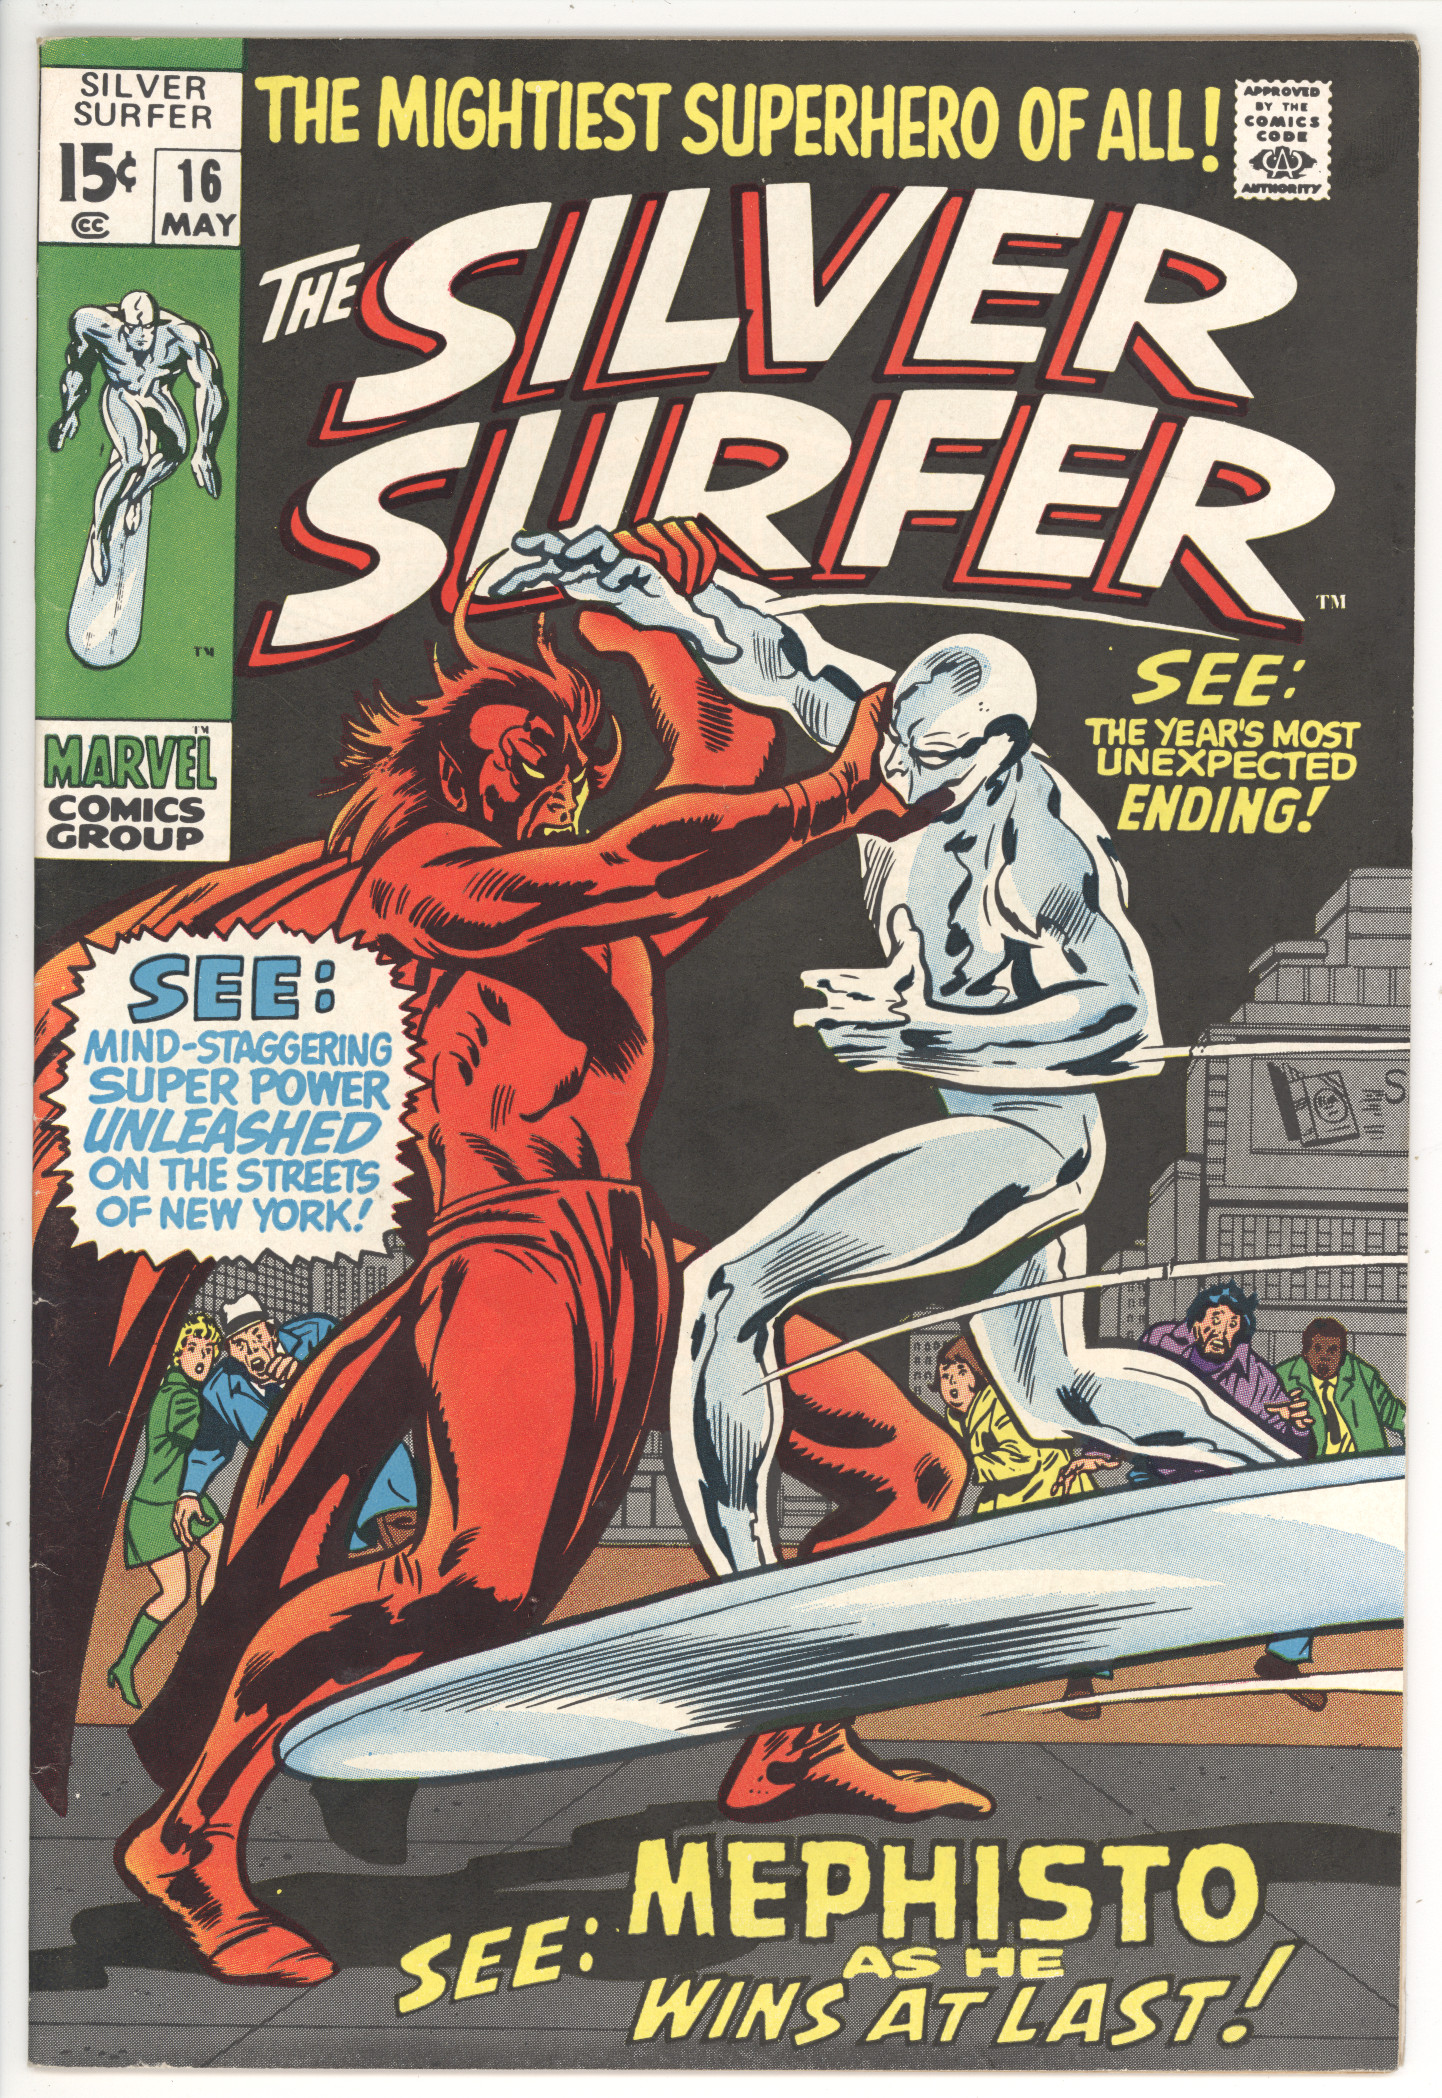 Silver Surfer #16 front